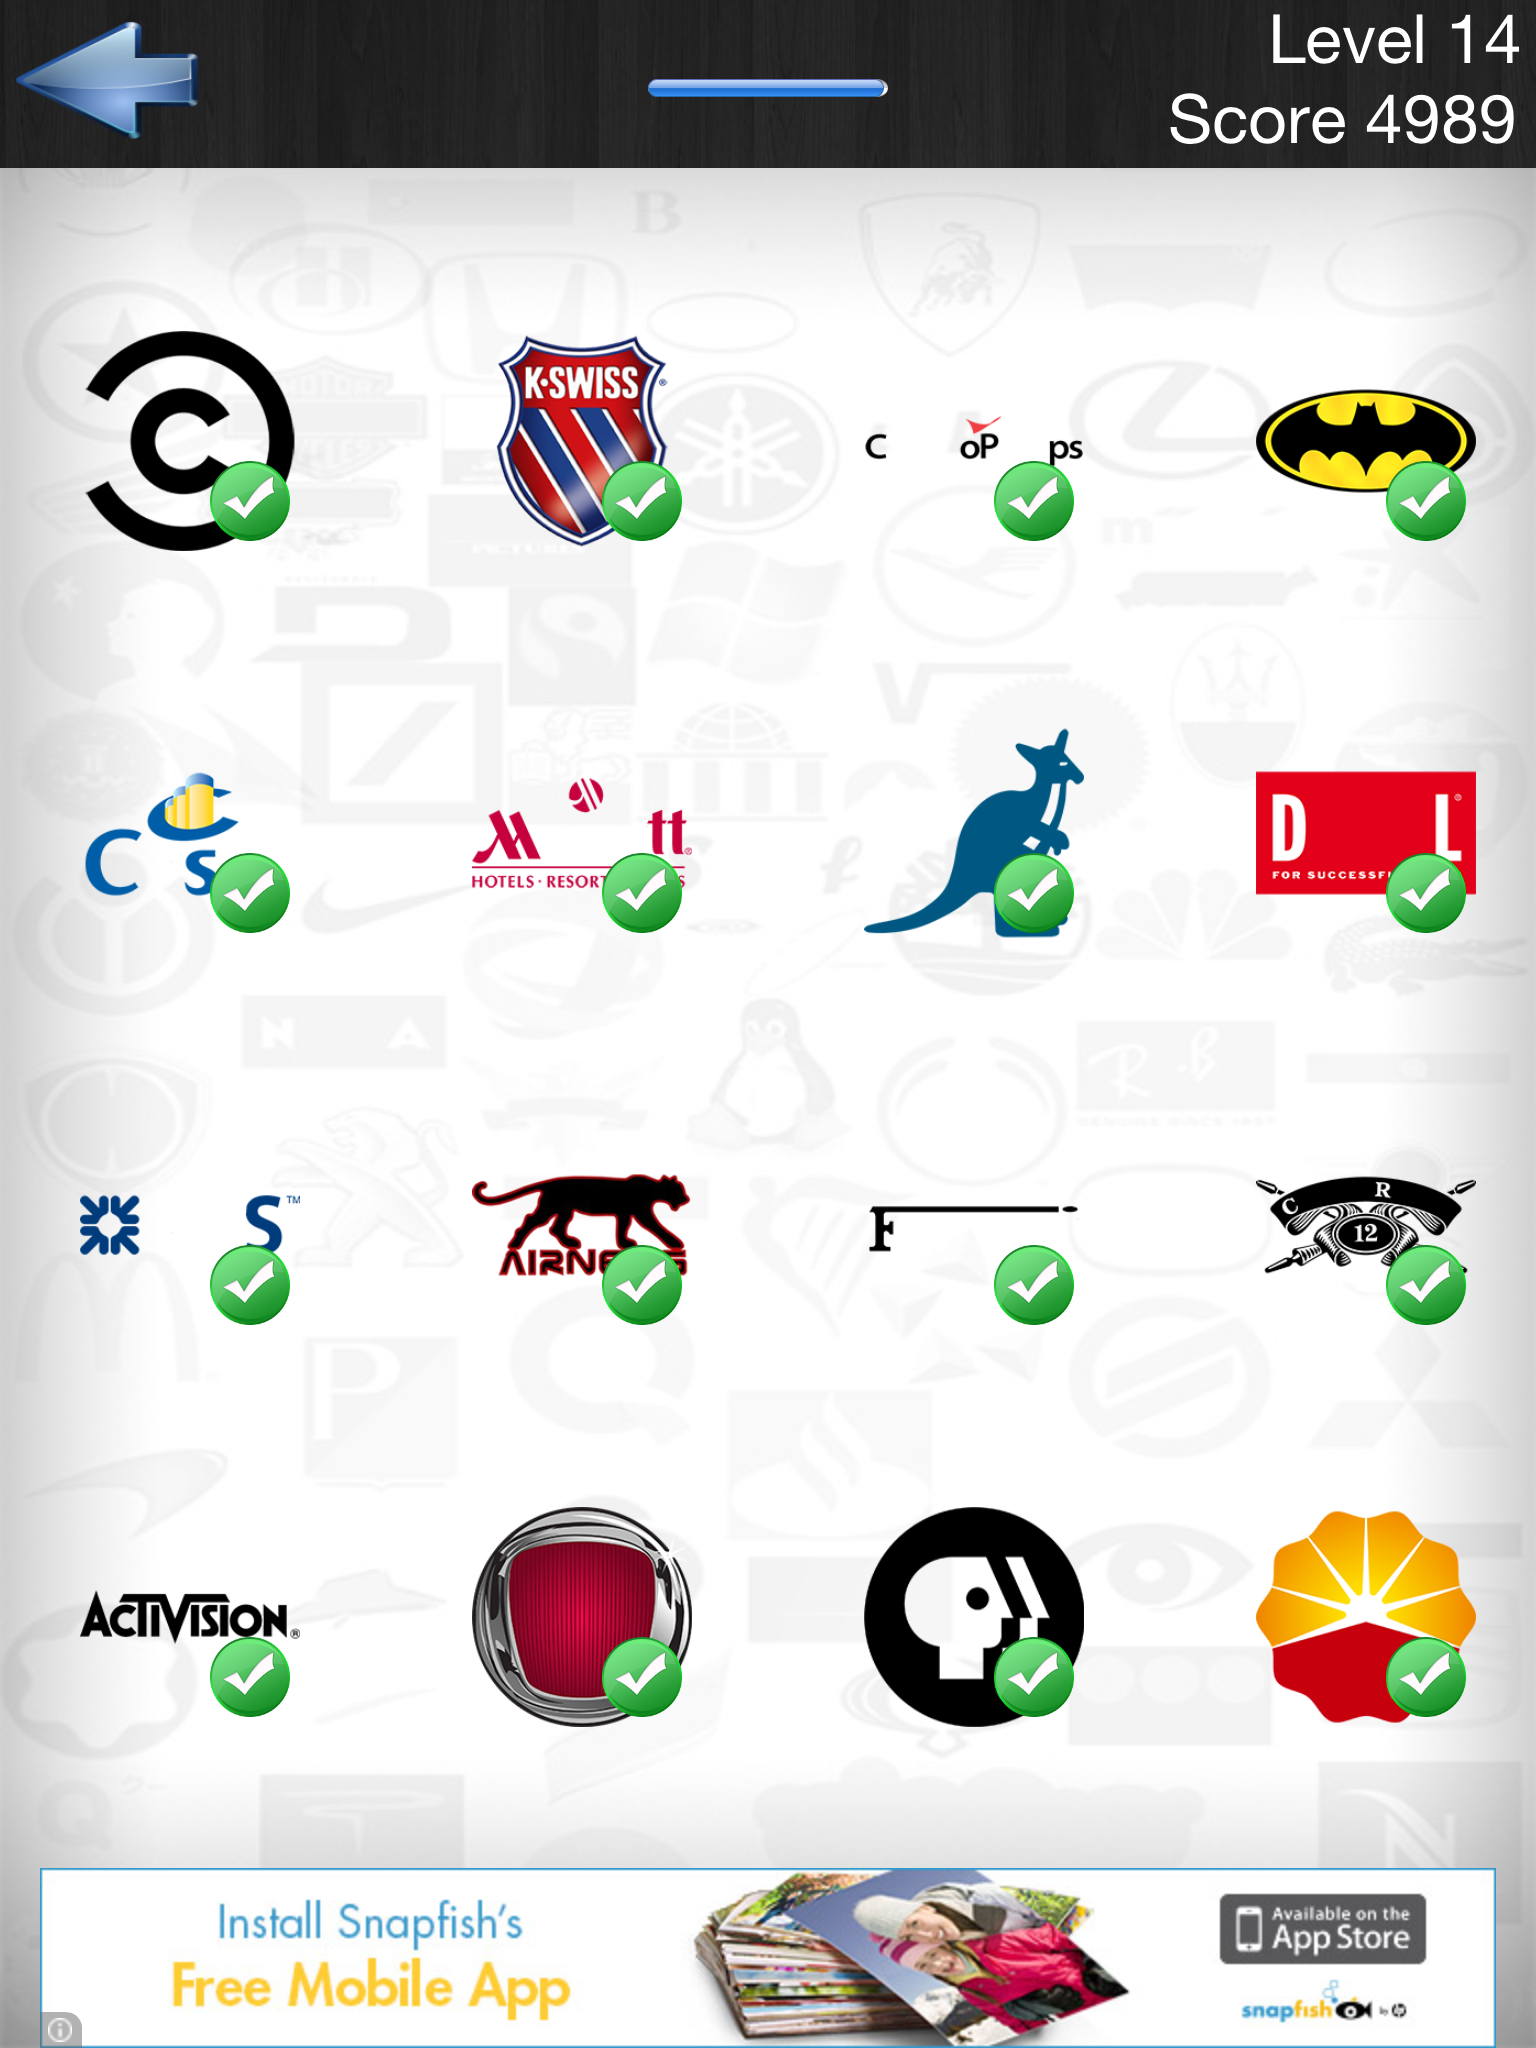 logo quiz answers level 11 android version